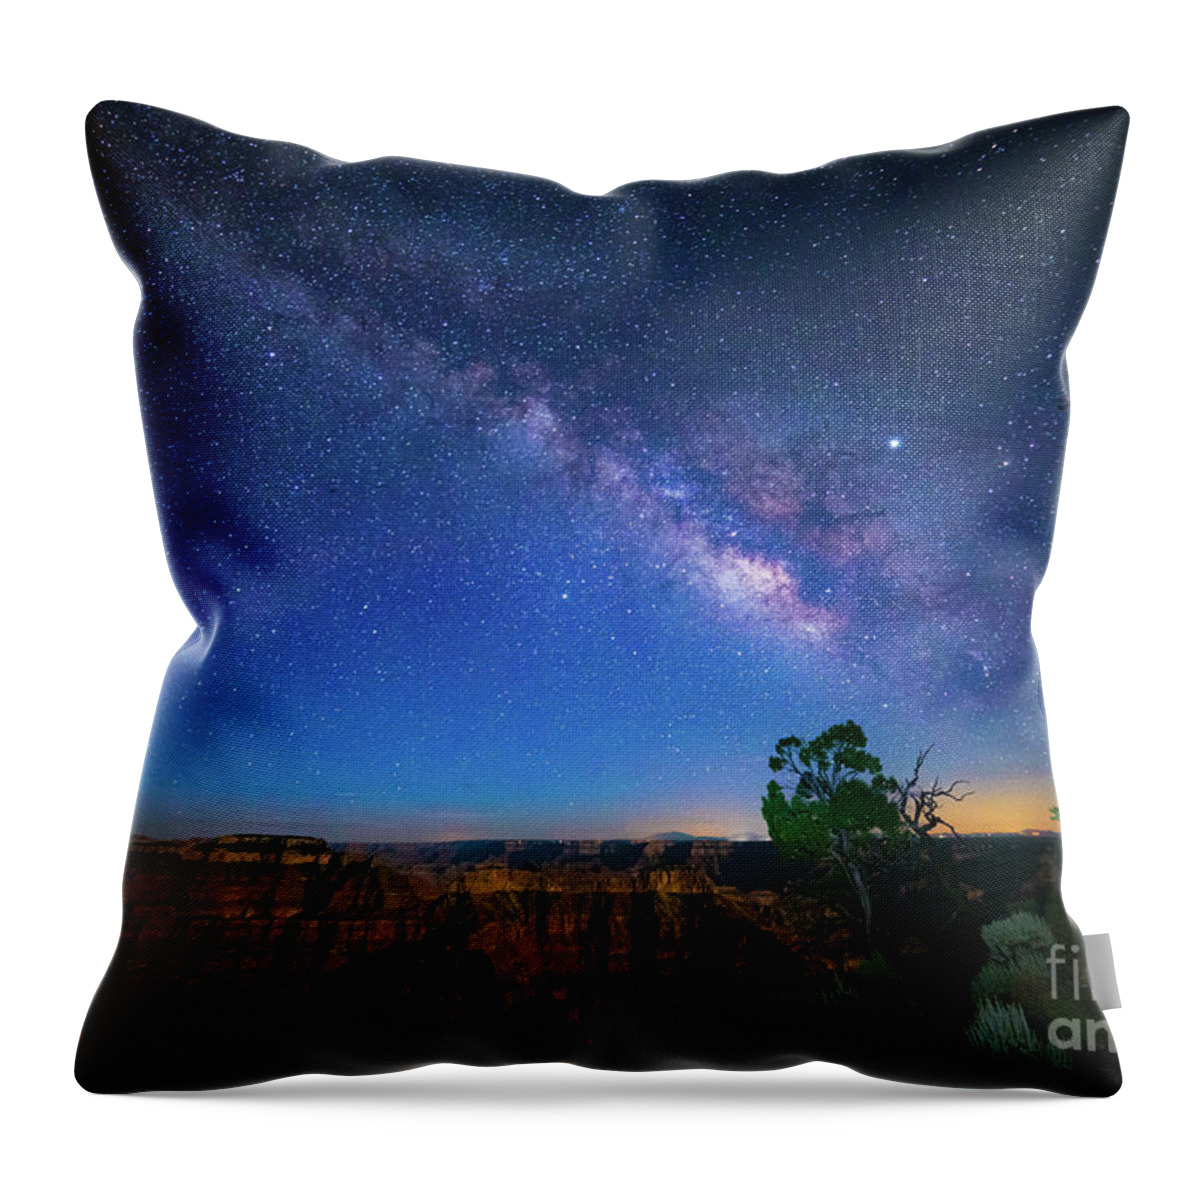 America Throw Pillow featuring the photograph Point Sublime Milky Way by Inge Johnsson